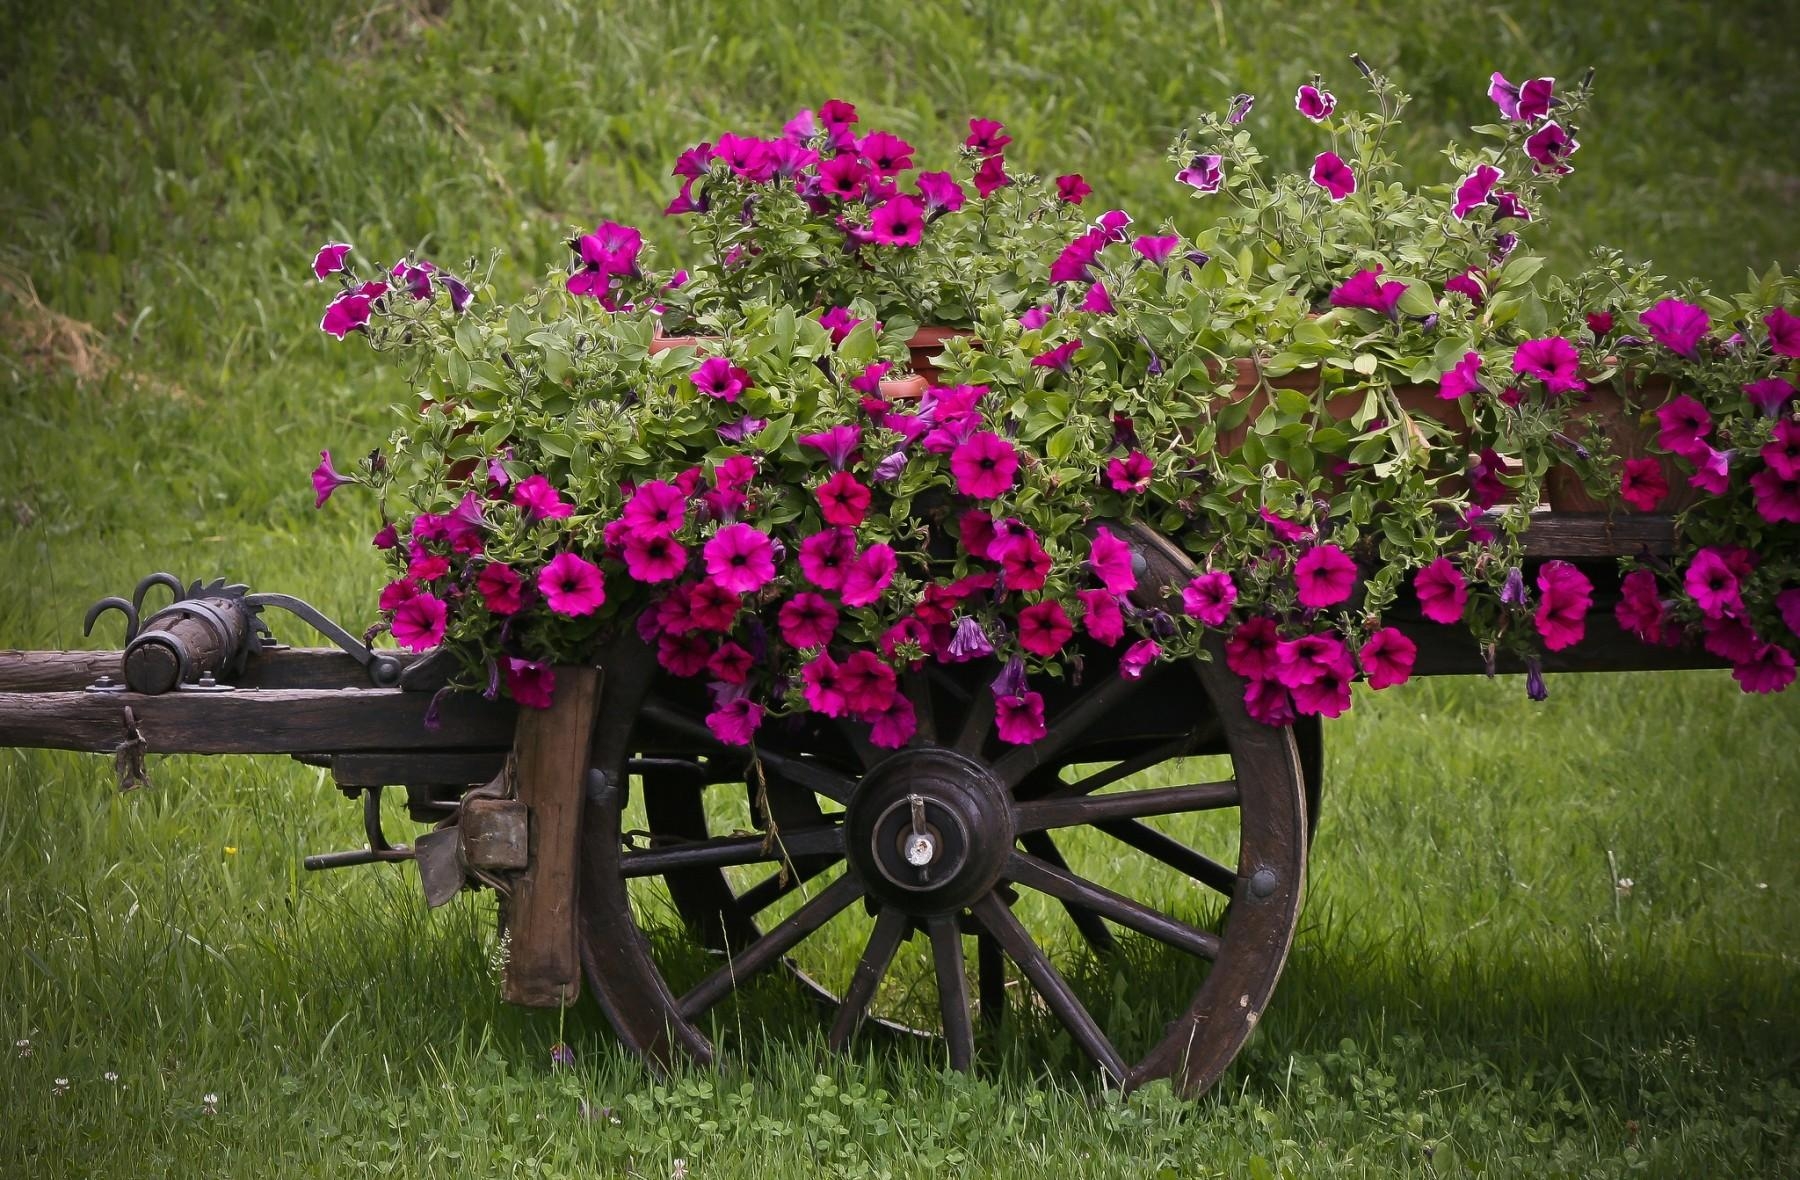 flowers, grass, handsomely, it's beautiful, pots, plant pot, cart, petunia wallpaper for mobile